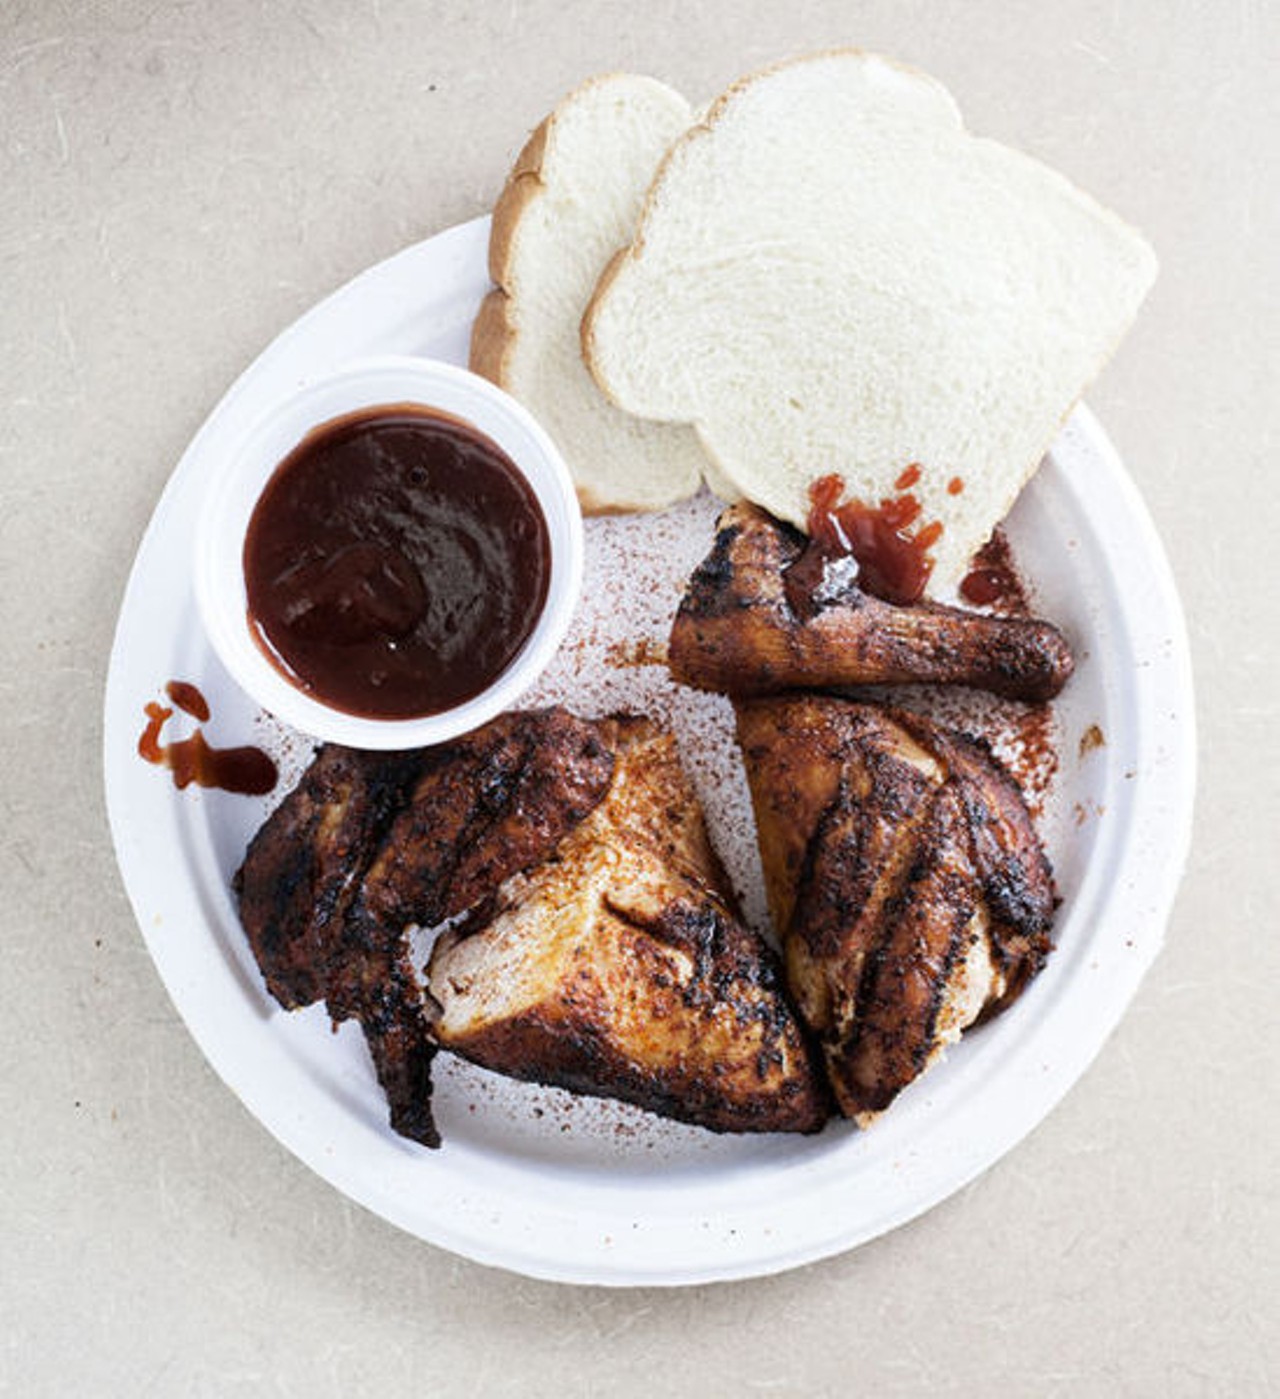 Chicken + sauce + bread = all you need at Lil' Mickey's Memphis Barbeque in St. Louis.